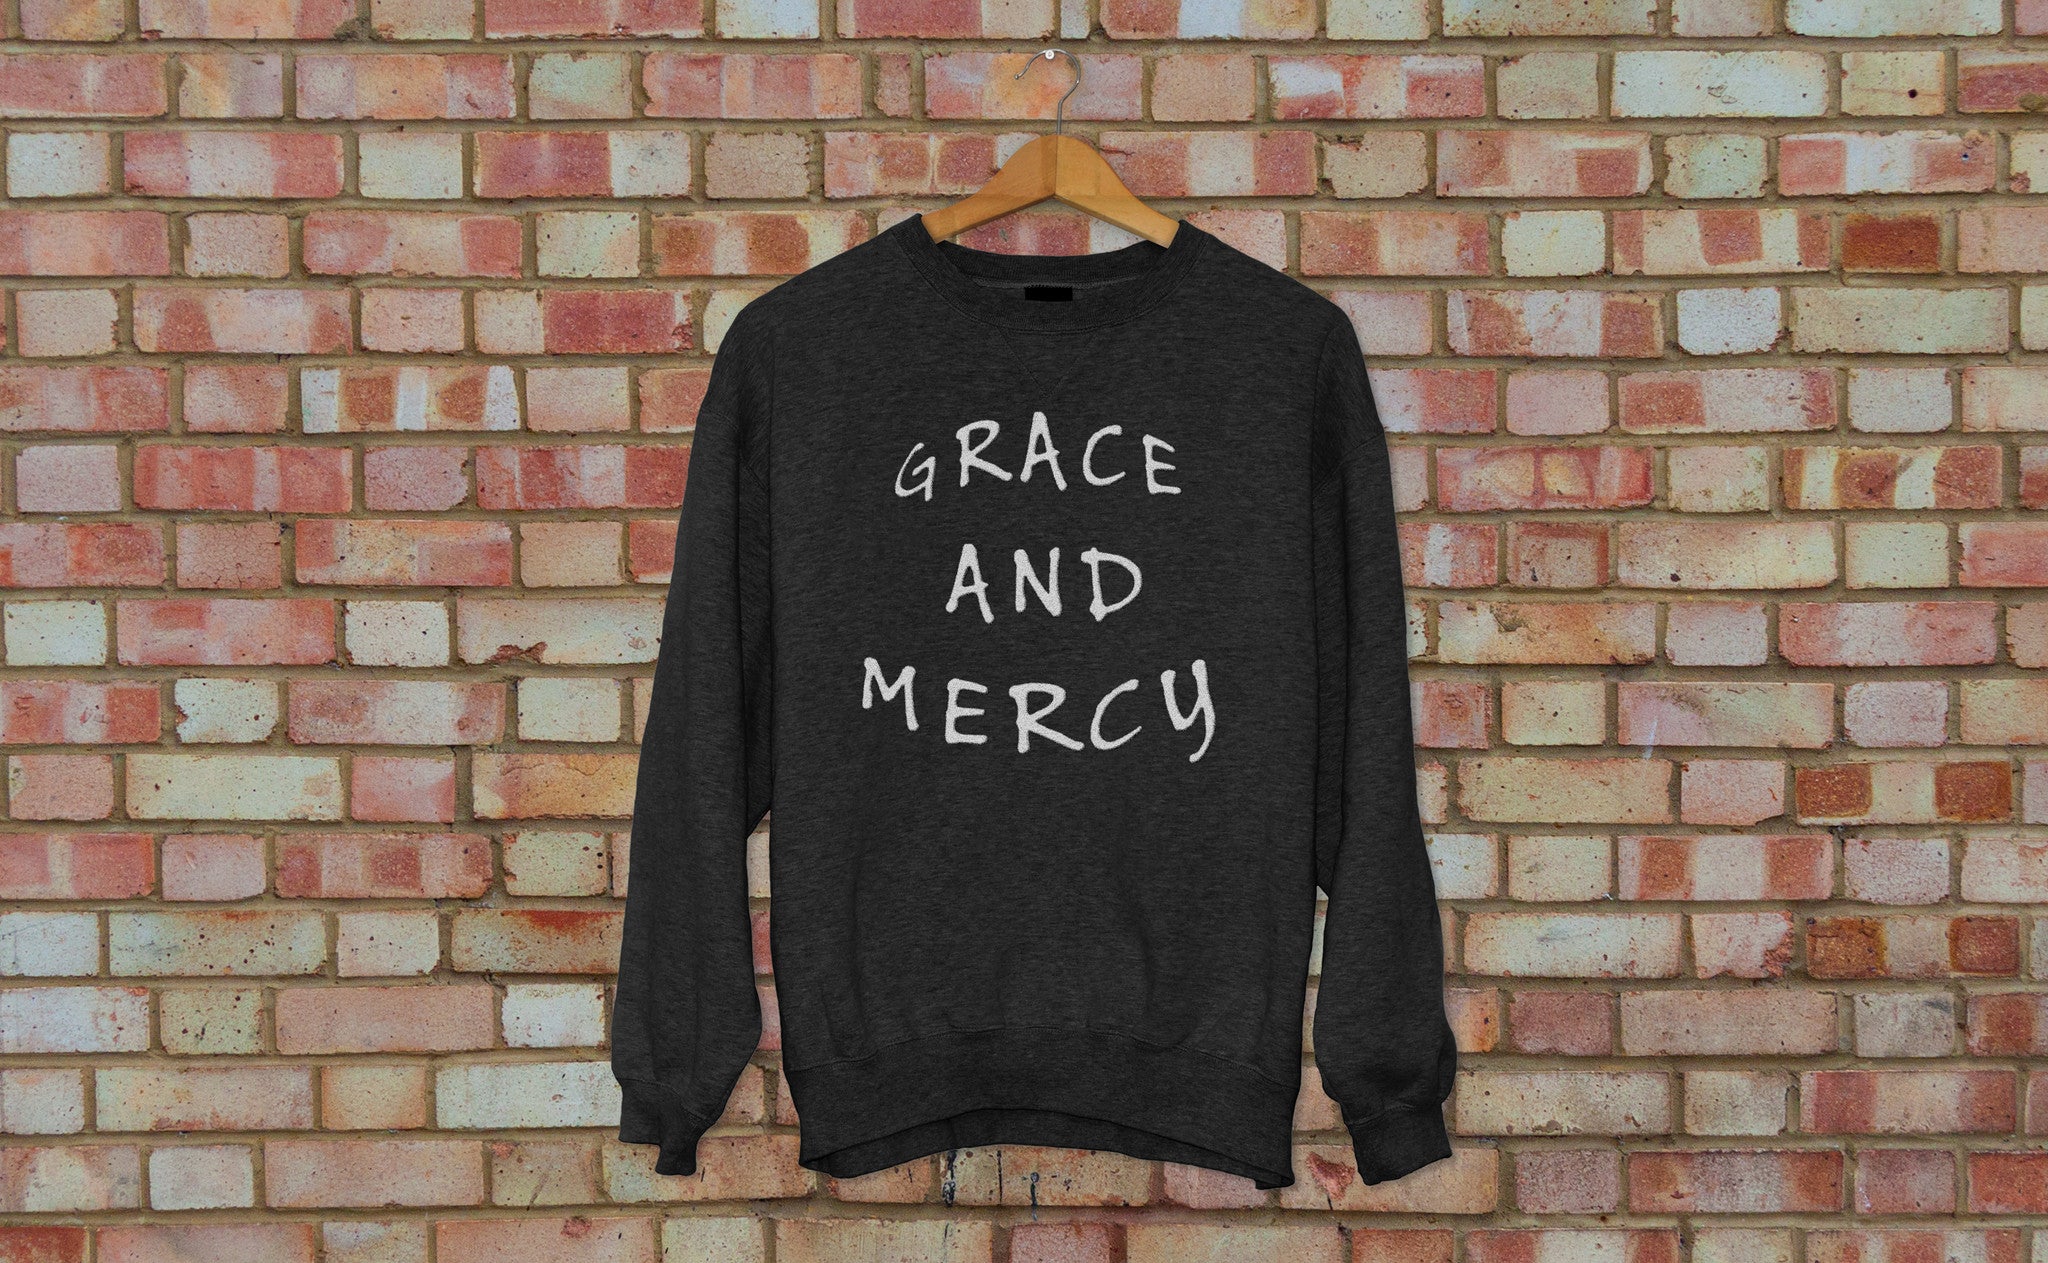 Grace and Mercy Crewneck Sweaters